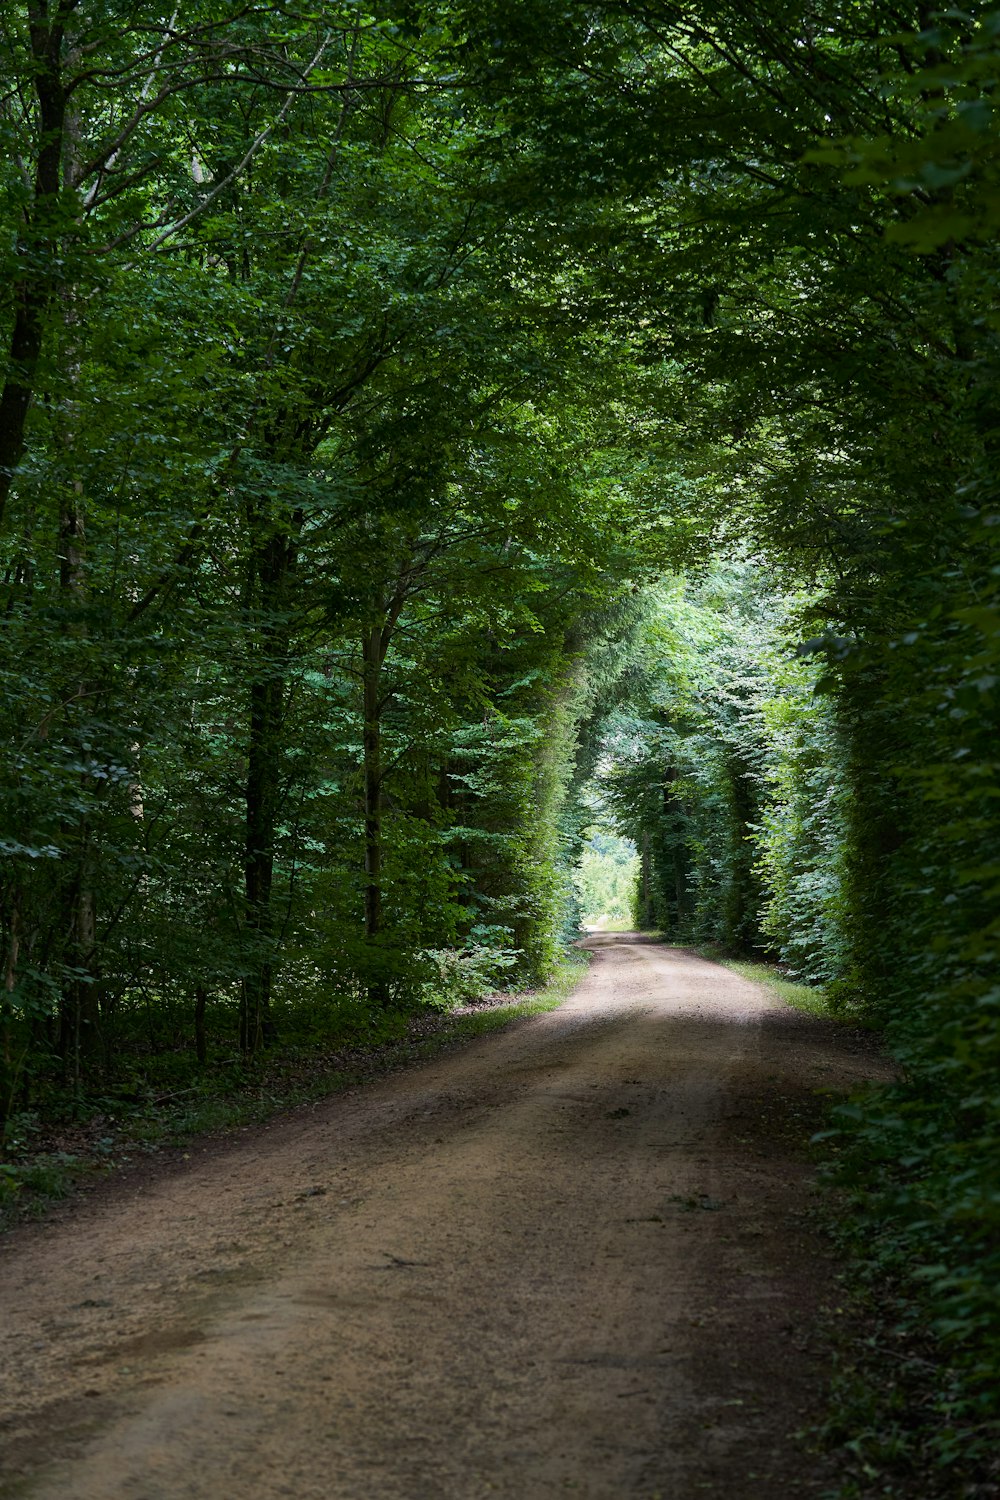 gray road in between green trees during daytime